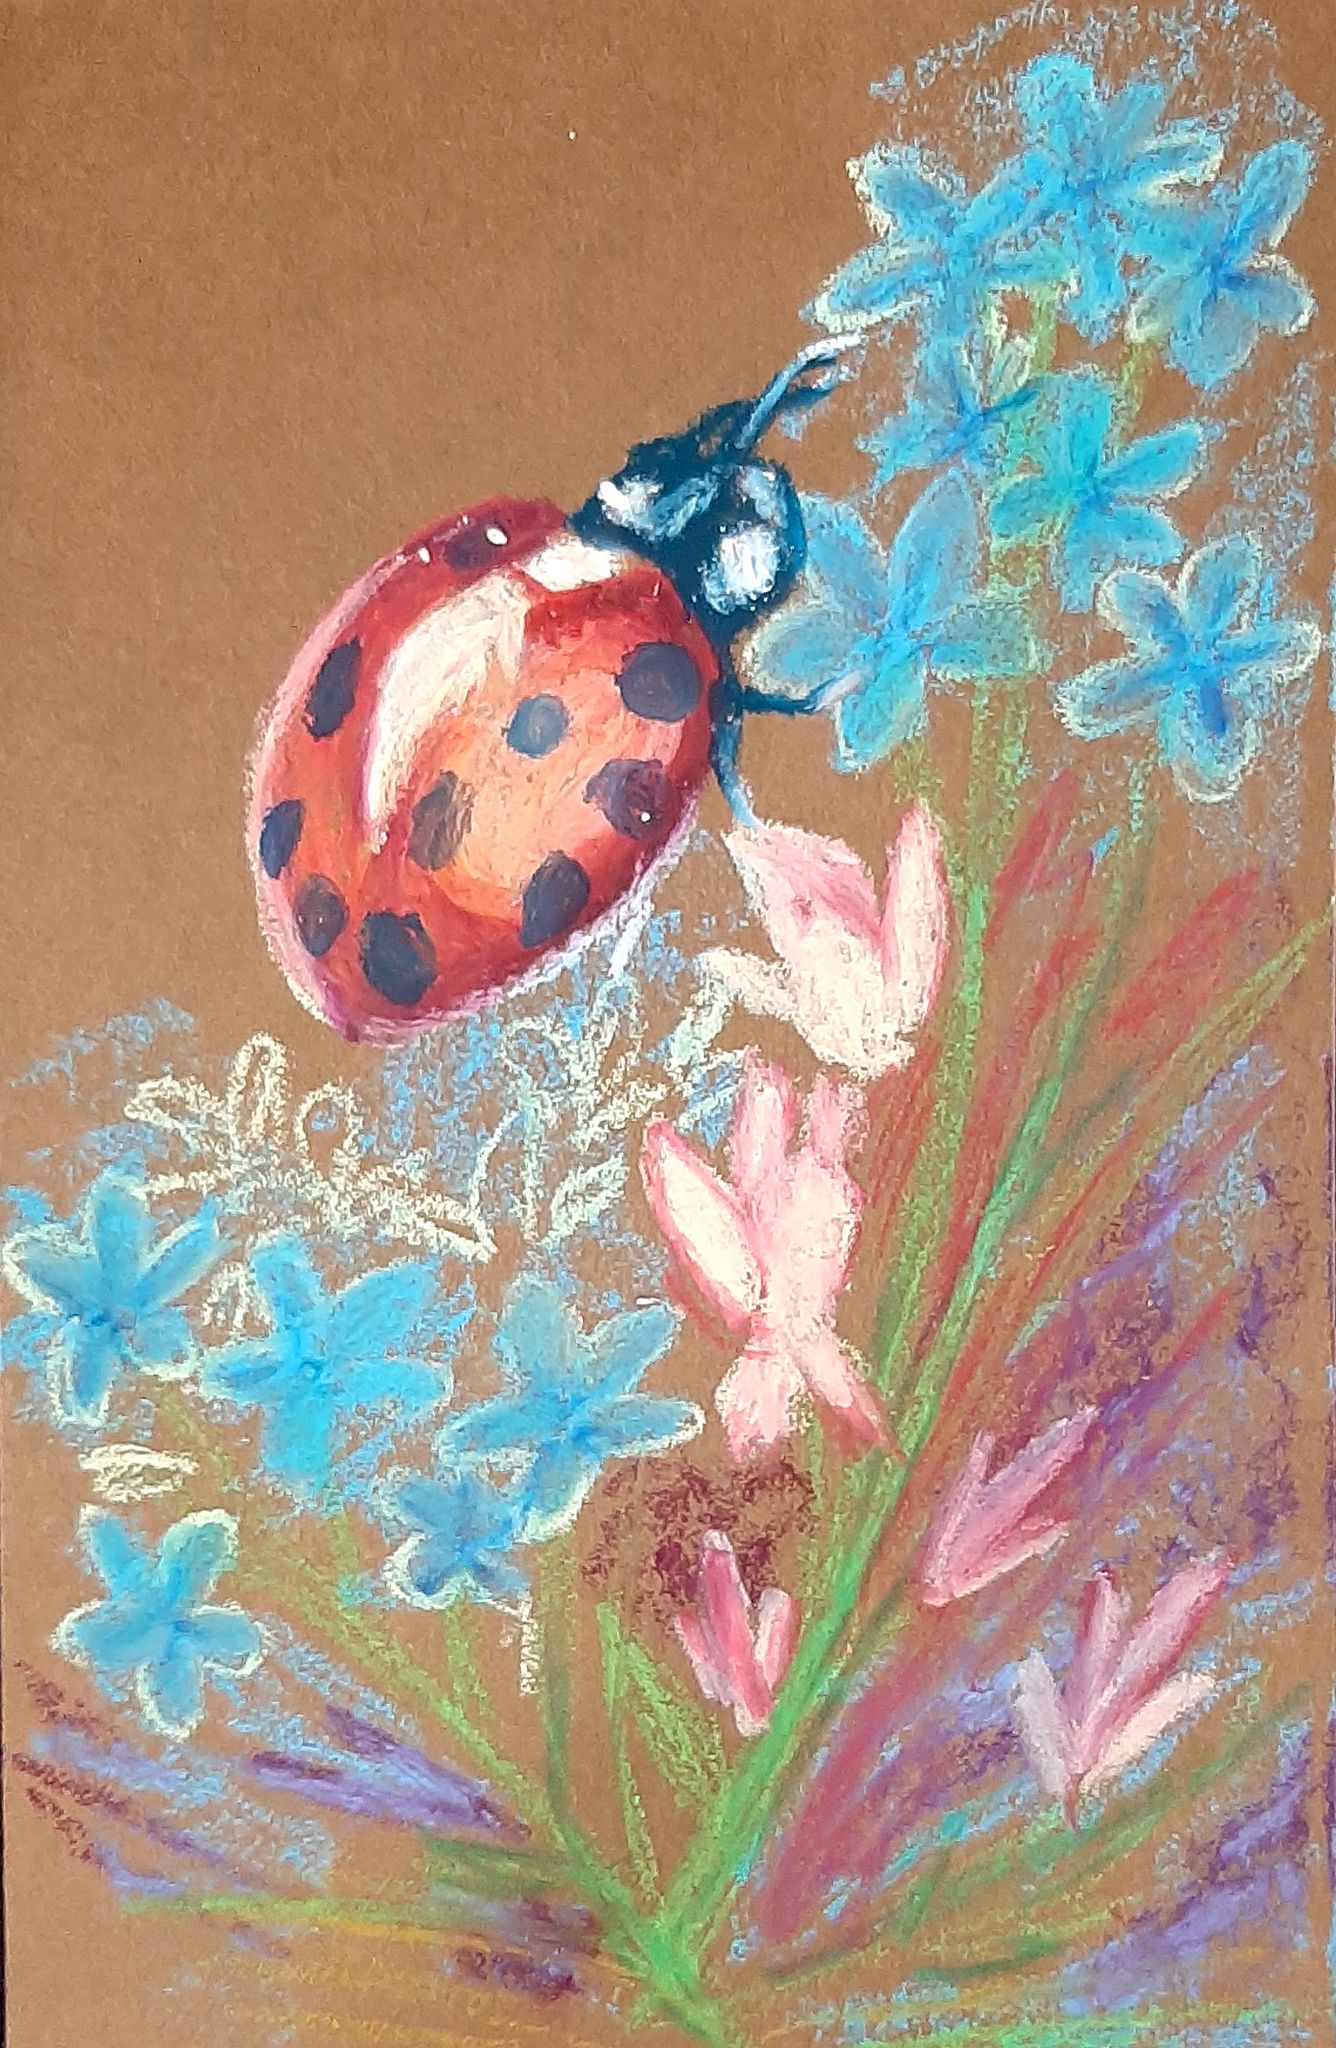 A pastel drawing on toned brown paper of a ladybug on flowers